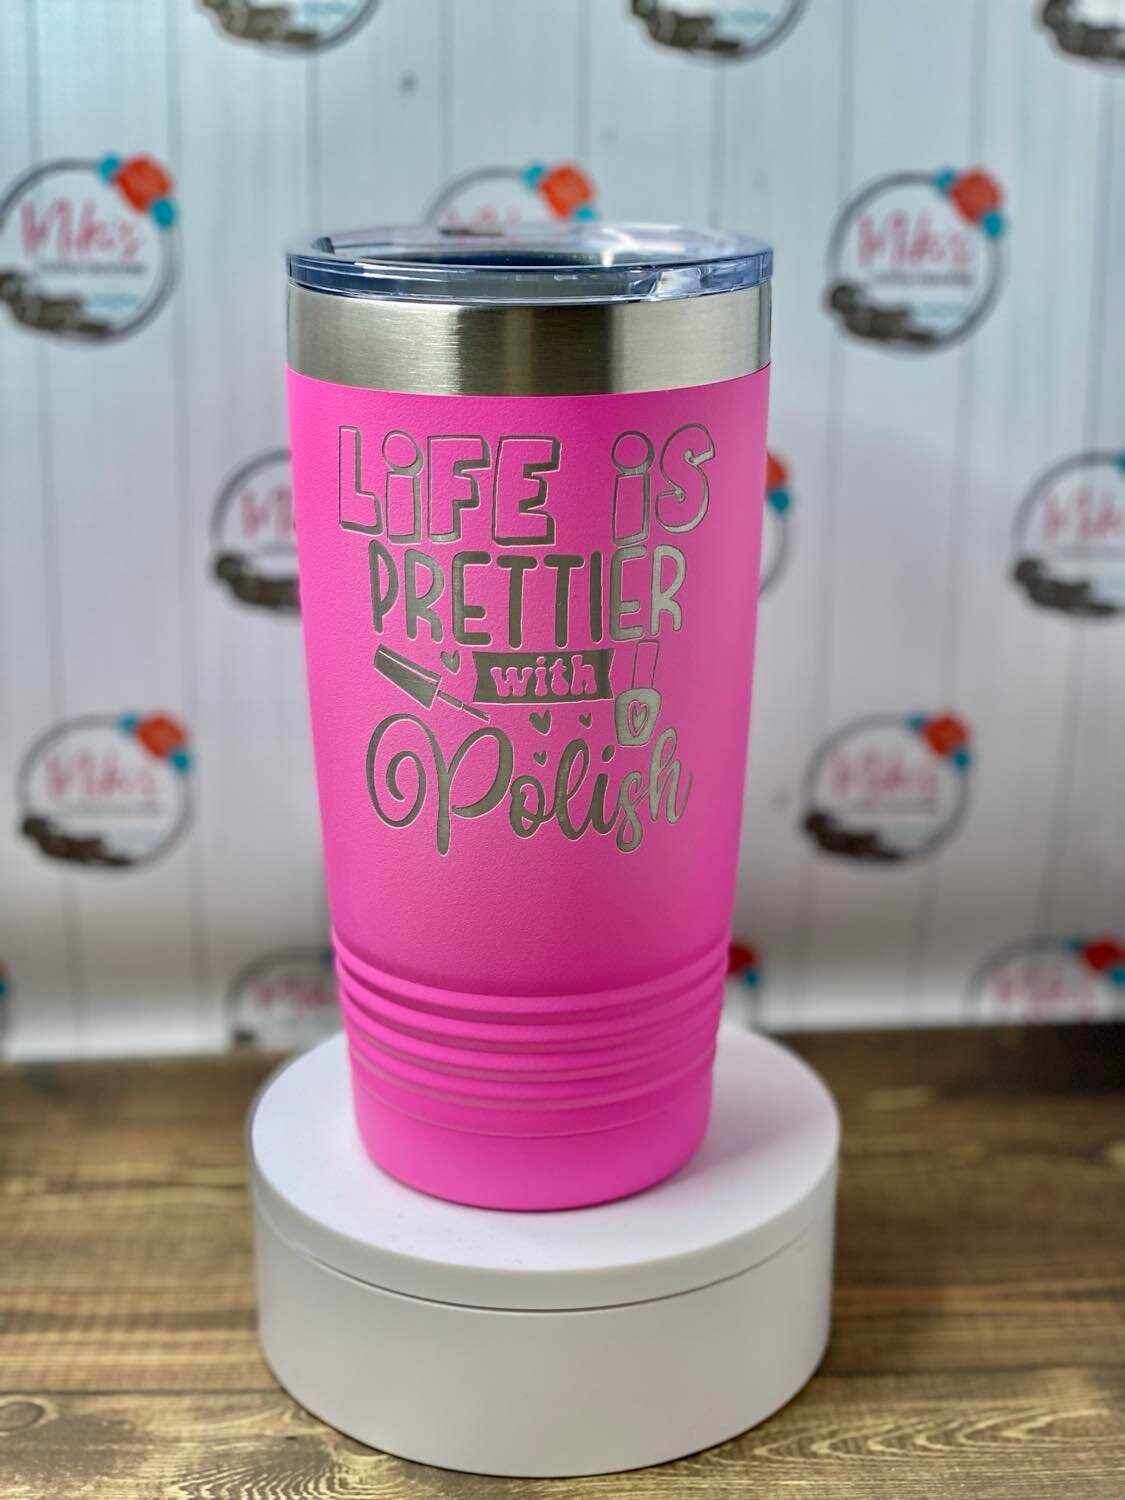 Caus Small Drink Tumbler - Pretty in Paint